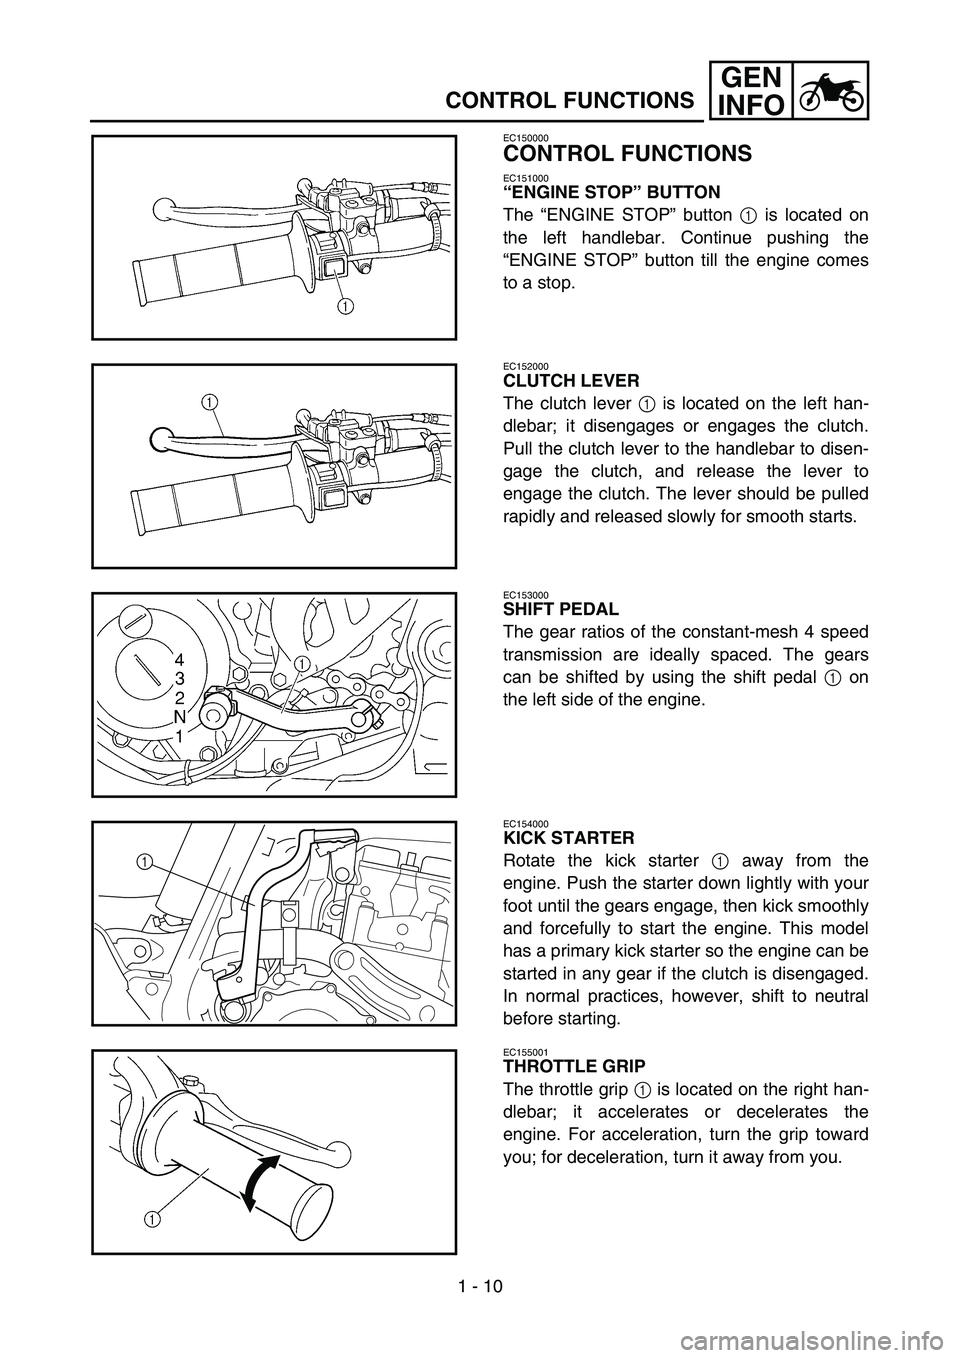 YAMAHA YZ450F 2005  Owners Manual 1 - 10
GEN
INFO
CONTROL FUNCTIONS
EC150000
CONTROL FUNCTIONS
EC151000
“ENGINE STOP” BUTTON
The “ENGINE STOP” button 1 is located on
the left handlebar. Continue pushing the
“ENGINE STOP” b